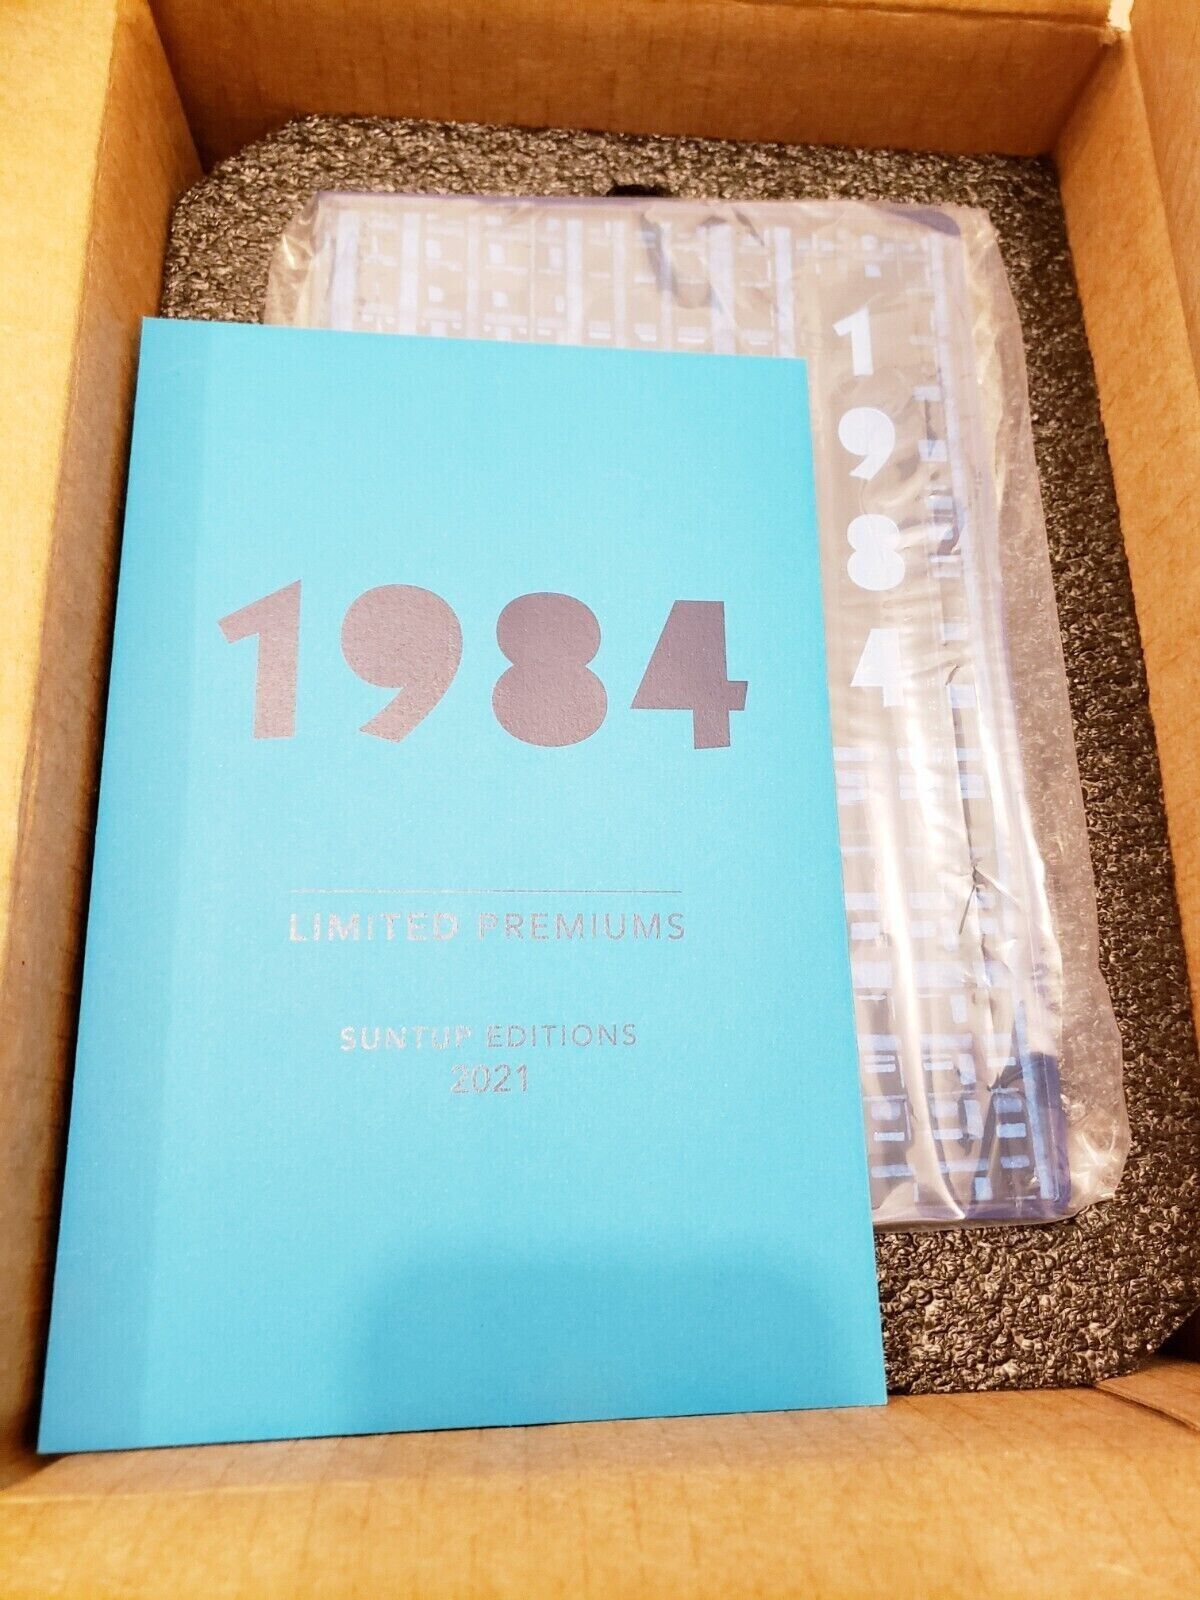 1984 by George Orwell - Suntup Editions